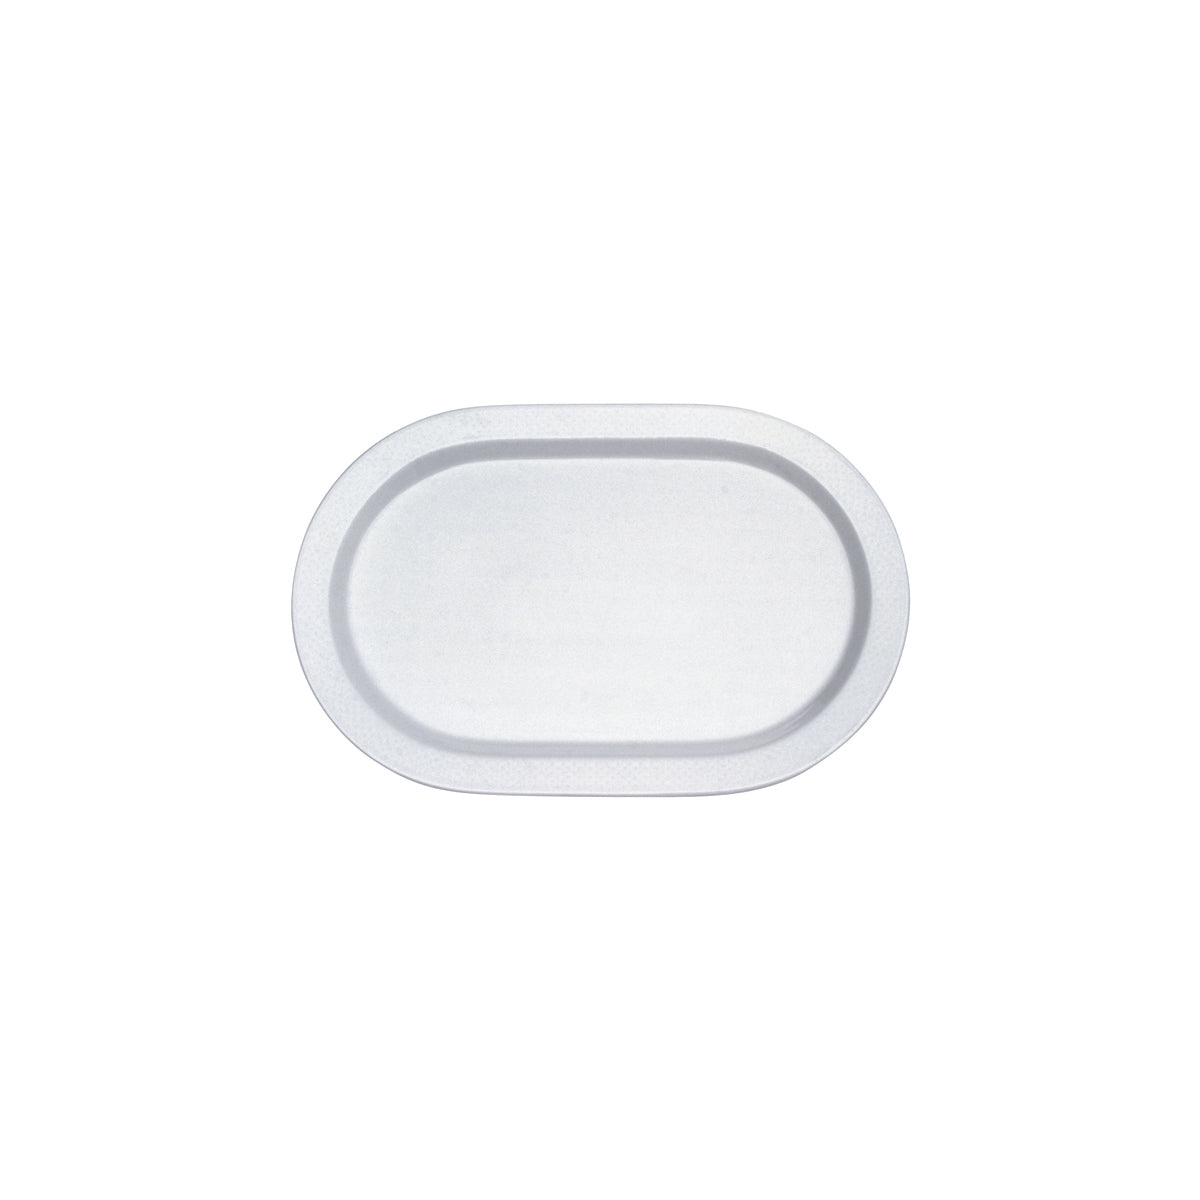 VB16-2155-2710 Villeroy And Boch Villeroy And Boch Easy White Oval Platter Wide Rim 370x235mm Tomkin Australia Hospitality Supplies